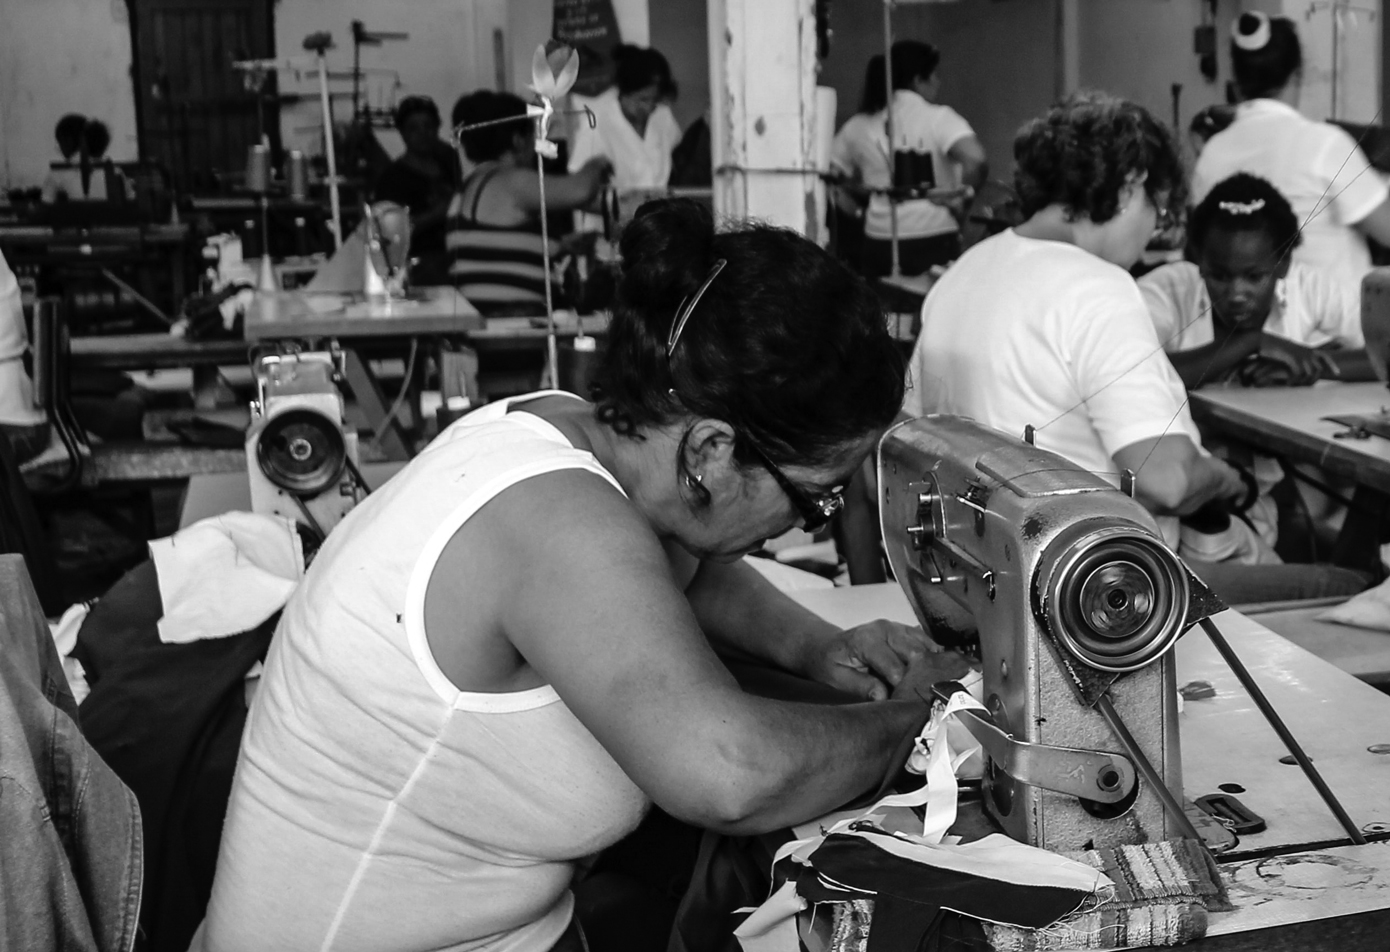 Pin on Garment workers